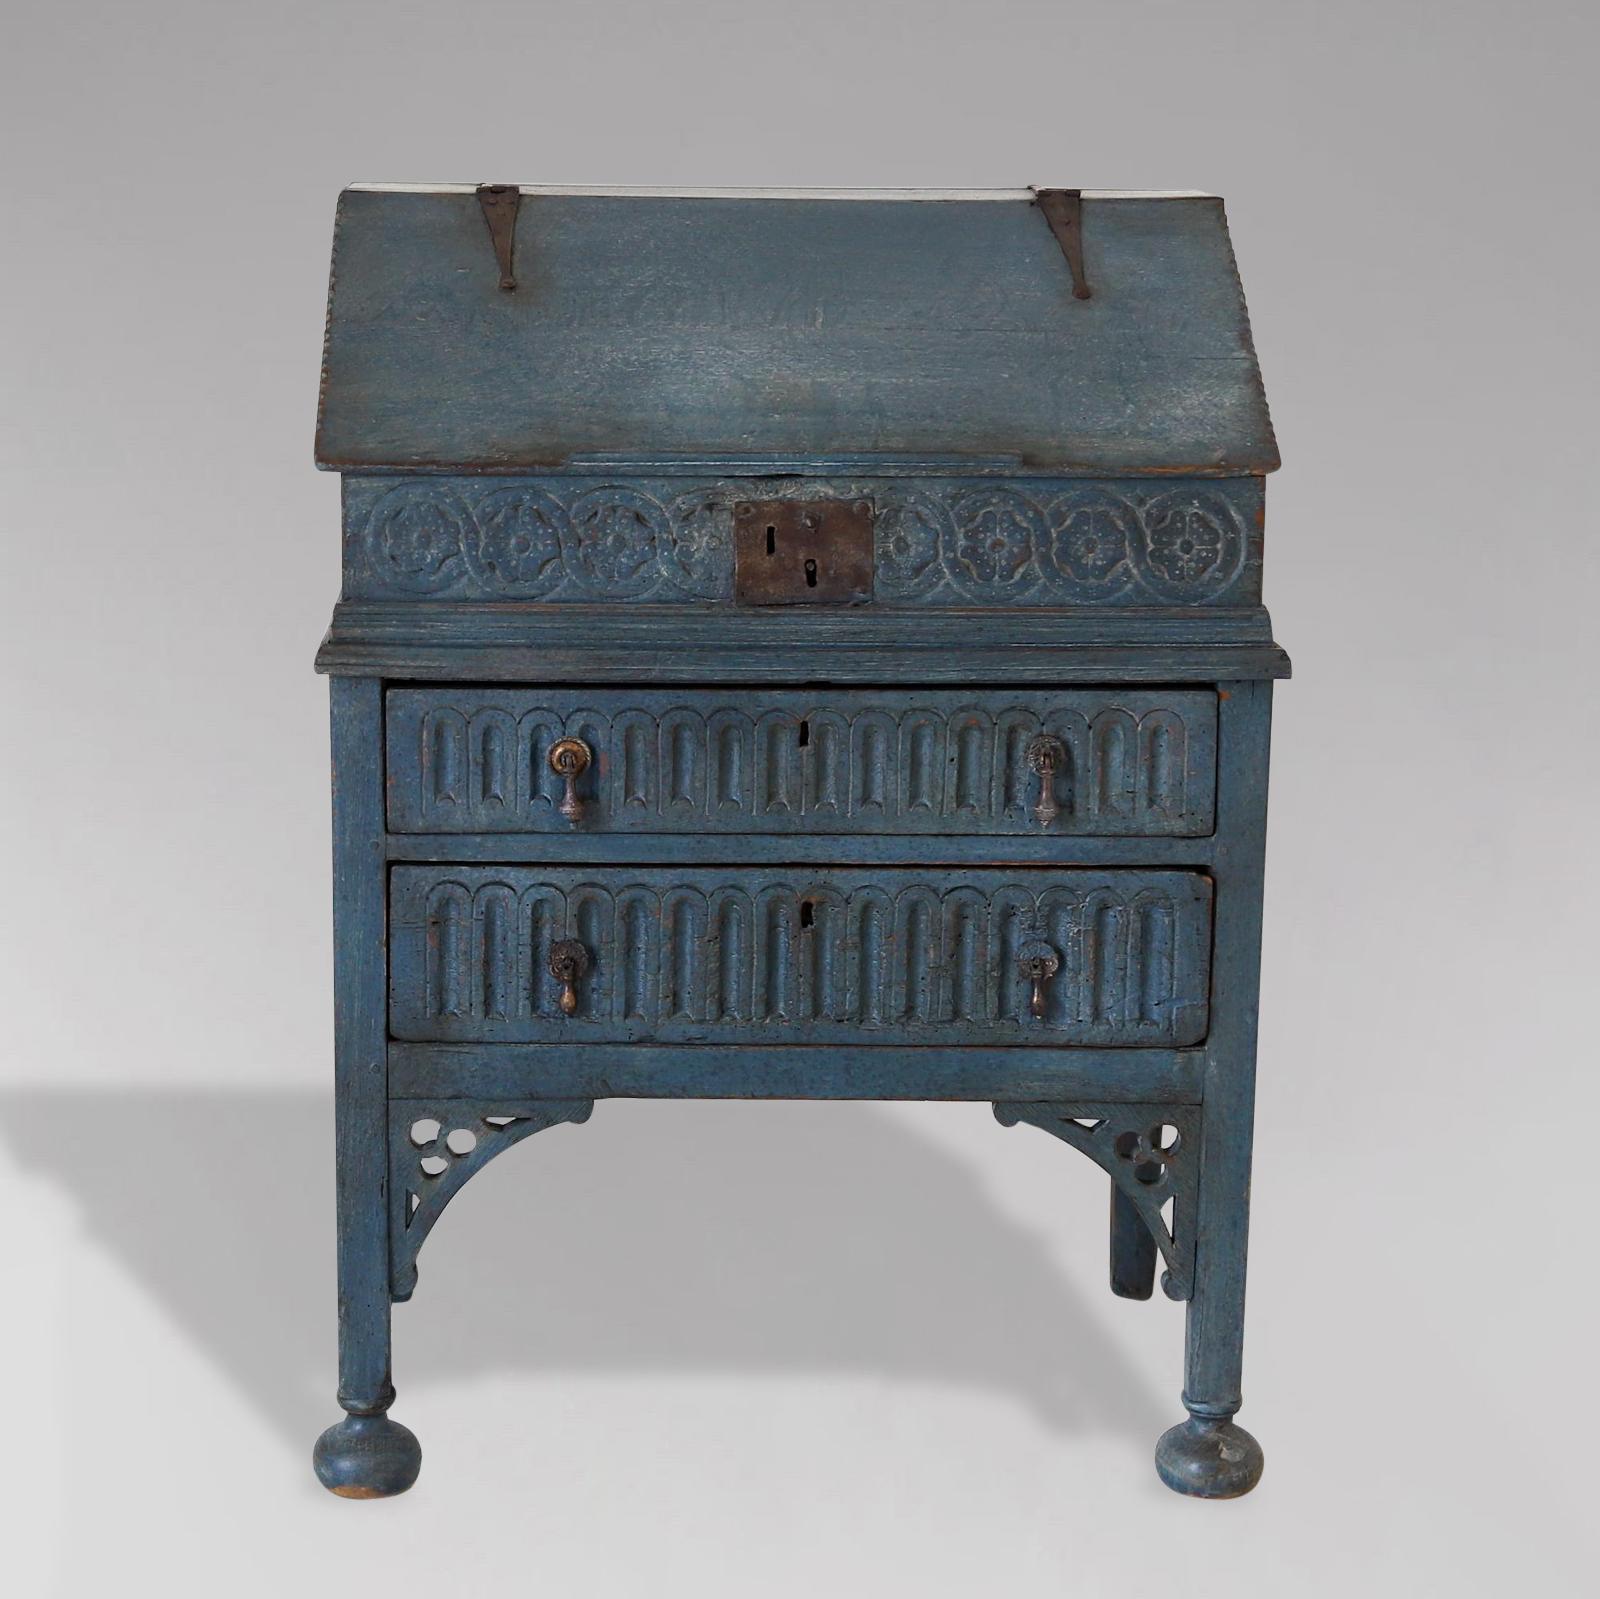 A wonderful characterful late 18th century portable painted carved oak bureau or bible box on a stand. There is carved detail throughout, in a mainly floral style with some reeded ornate shaped carvings to the base. The top with moulded edge and